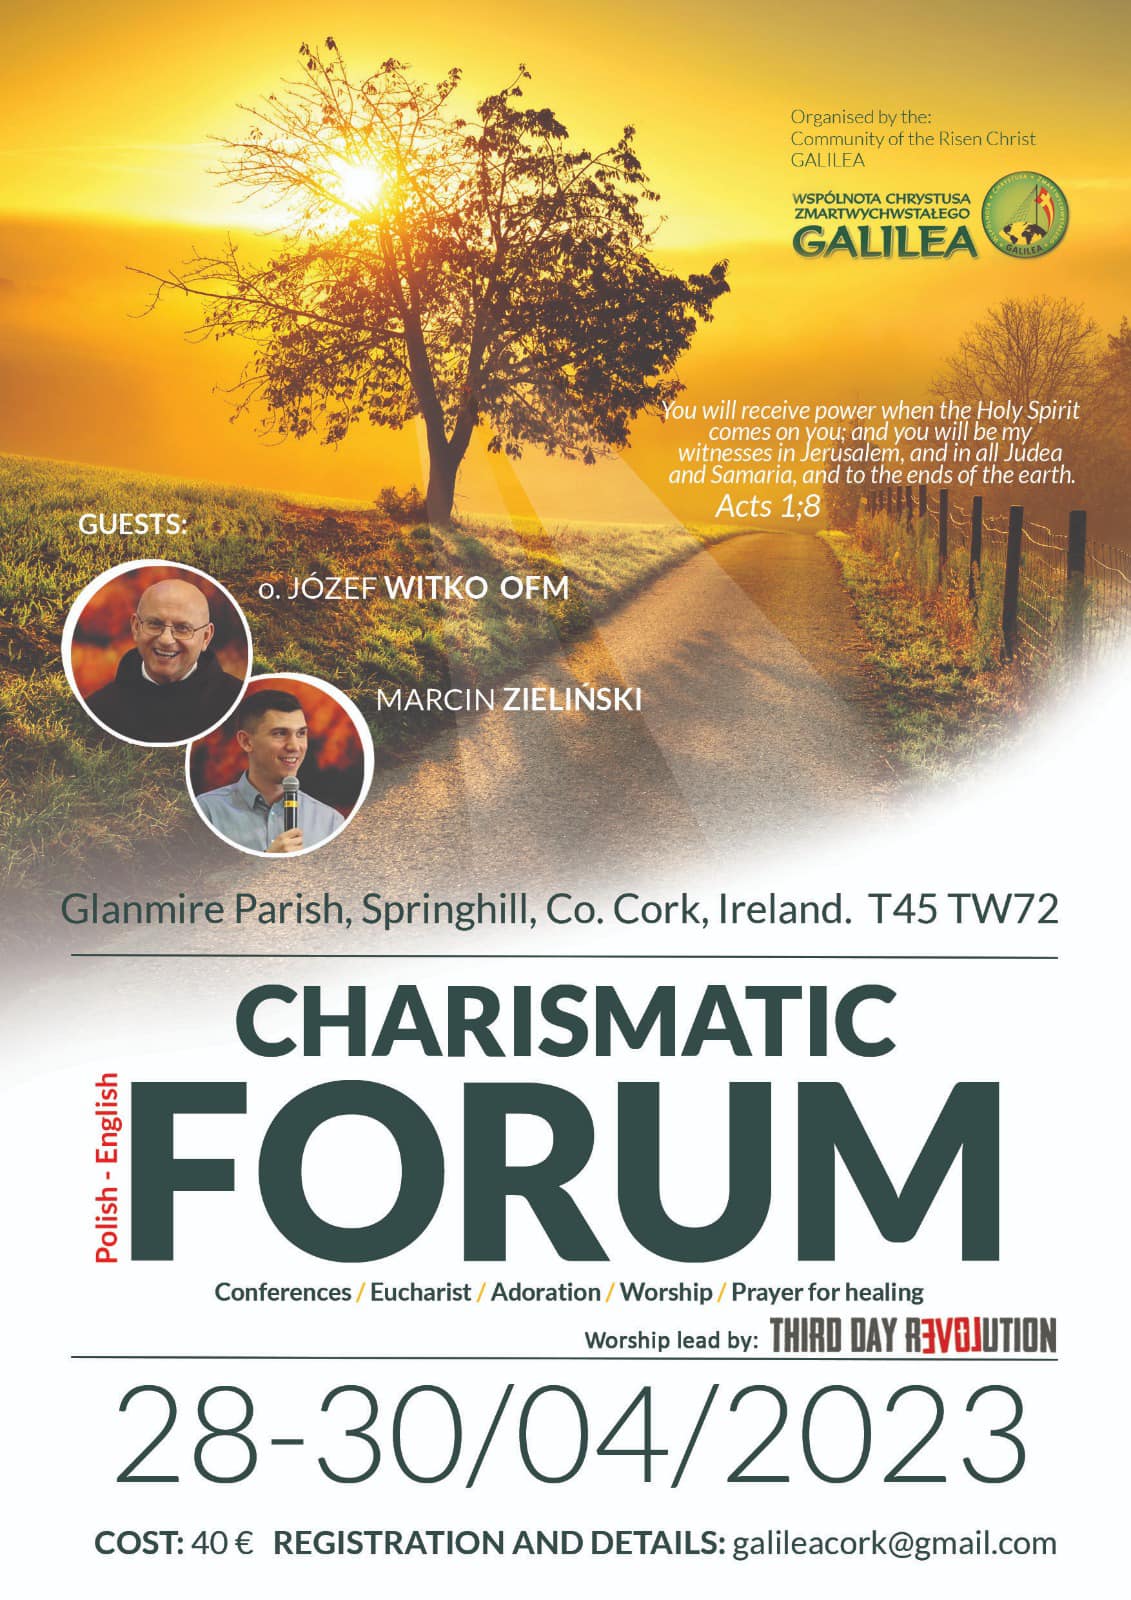 Charistmatic Forum Conference. 28, 29, 30th April